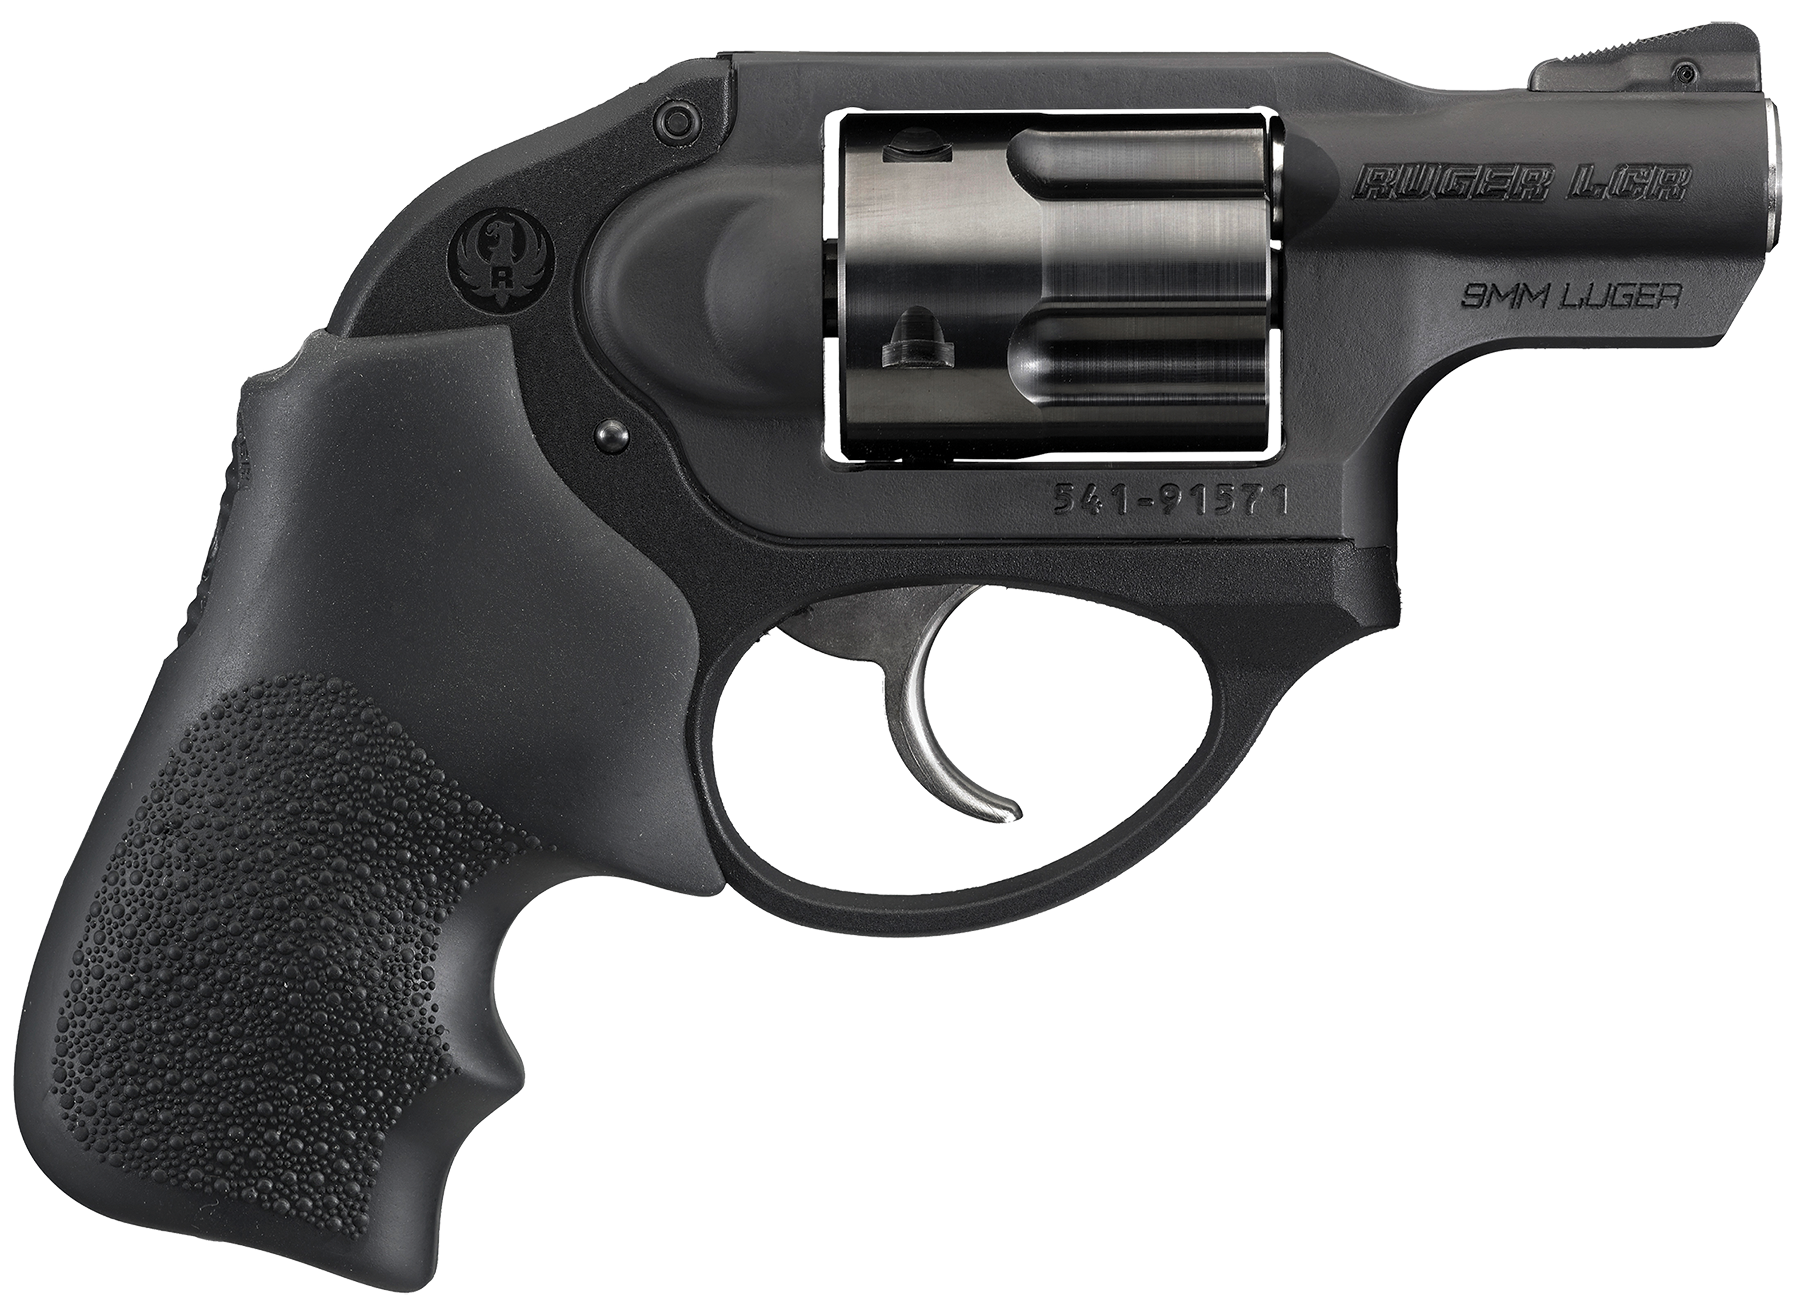 Ruger 5456 LCR Standard Double 9mm 1.87" 5 Hogue Tamer Monogrip Black Black Stainless Steel